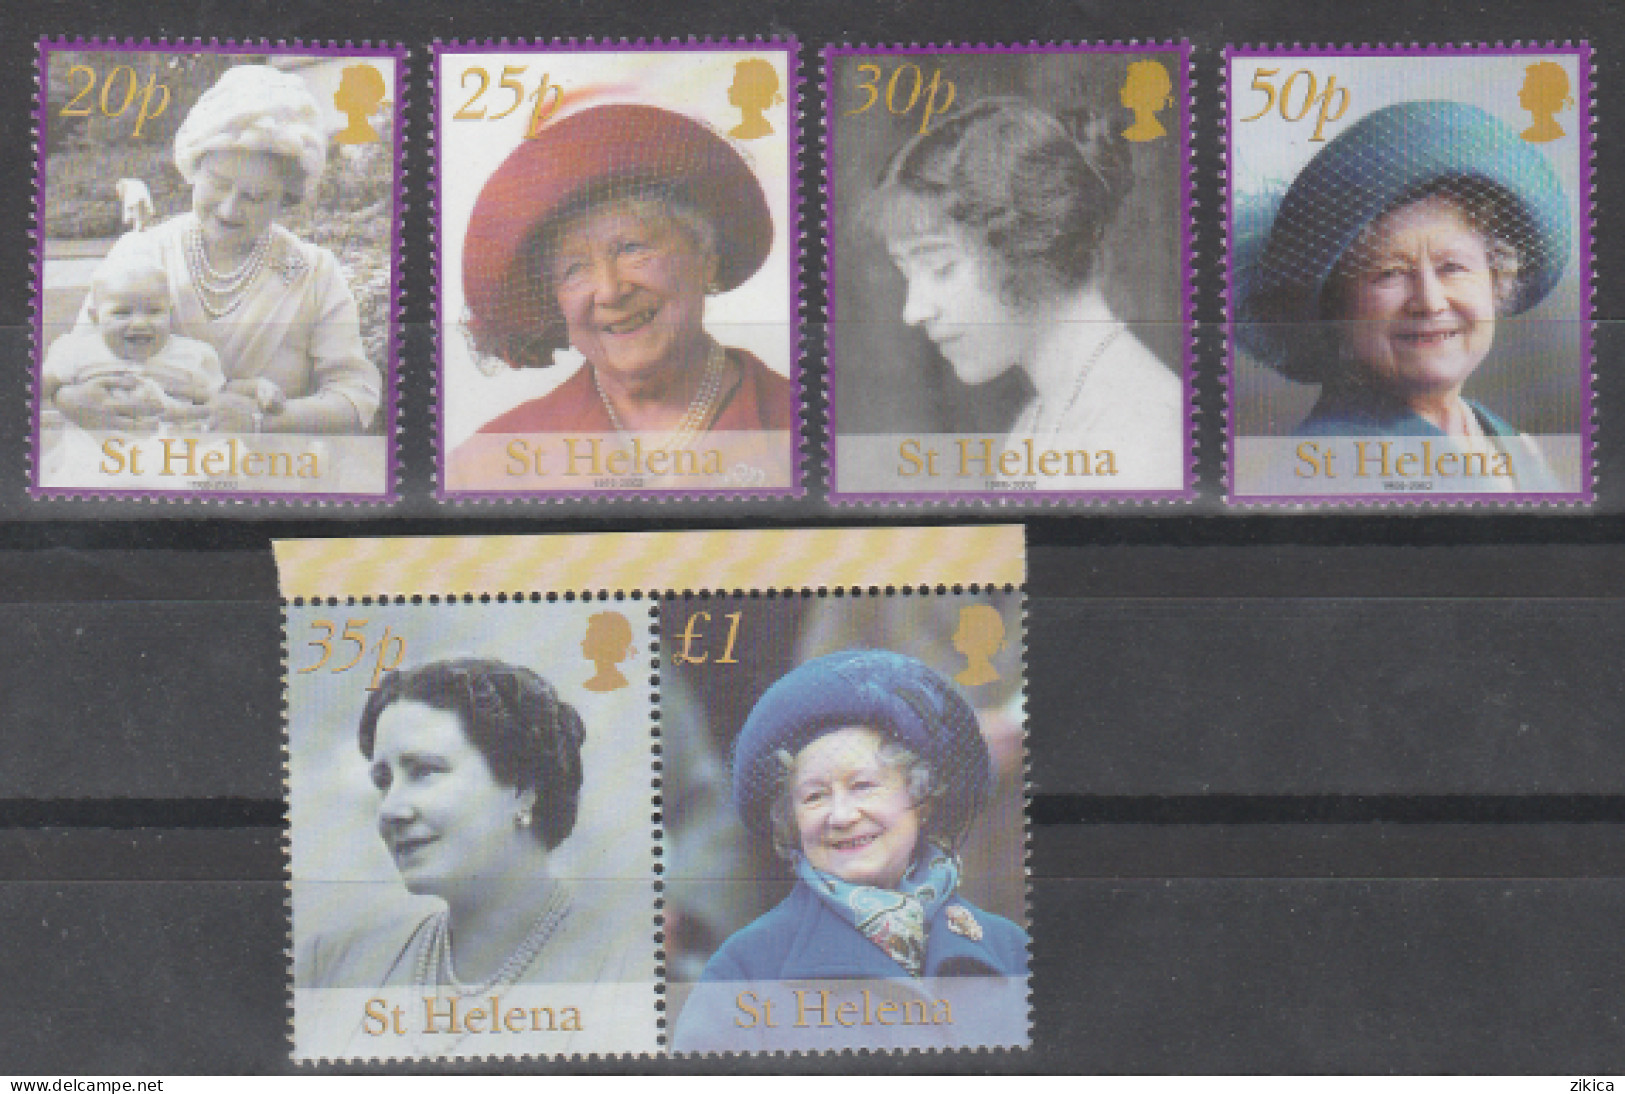 Saint Helena Island 2002 The Death Of Queen Elizabeth The Queen Mother, Stamps And Bl.stamps. MNH** - Saint Helena Island